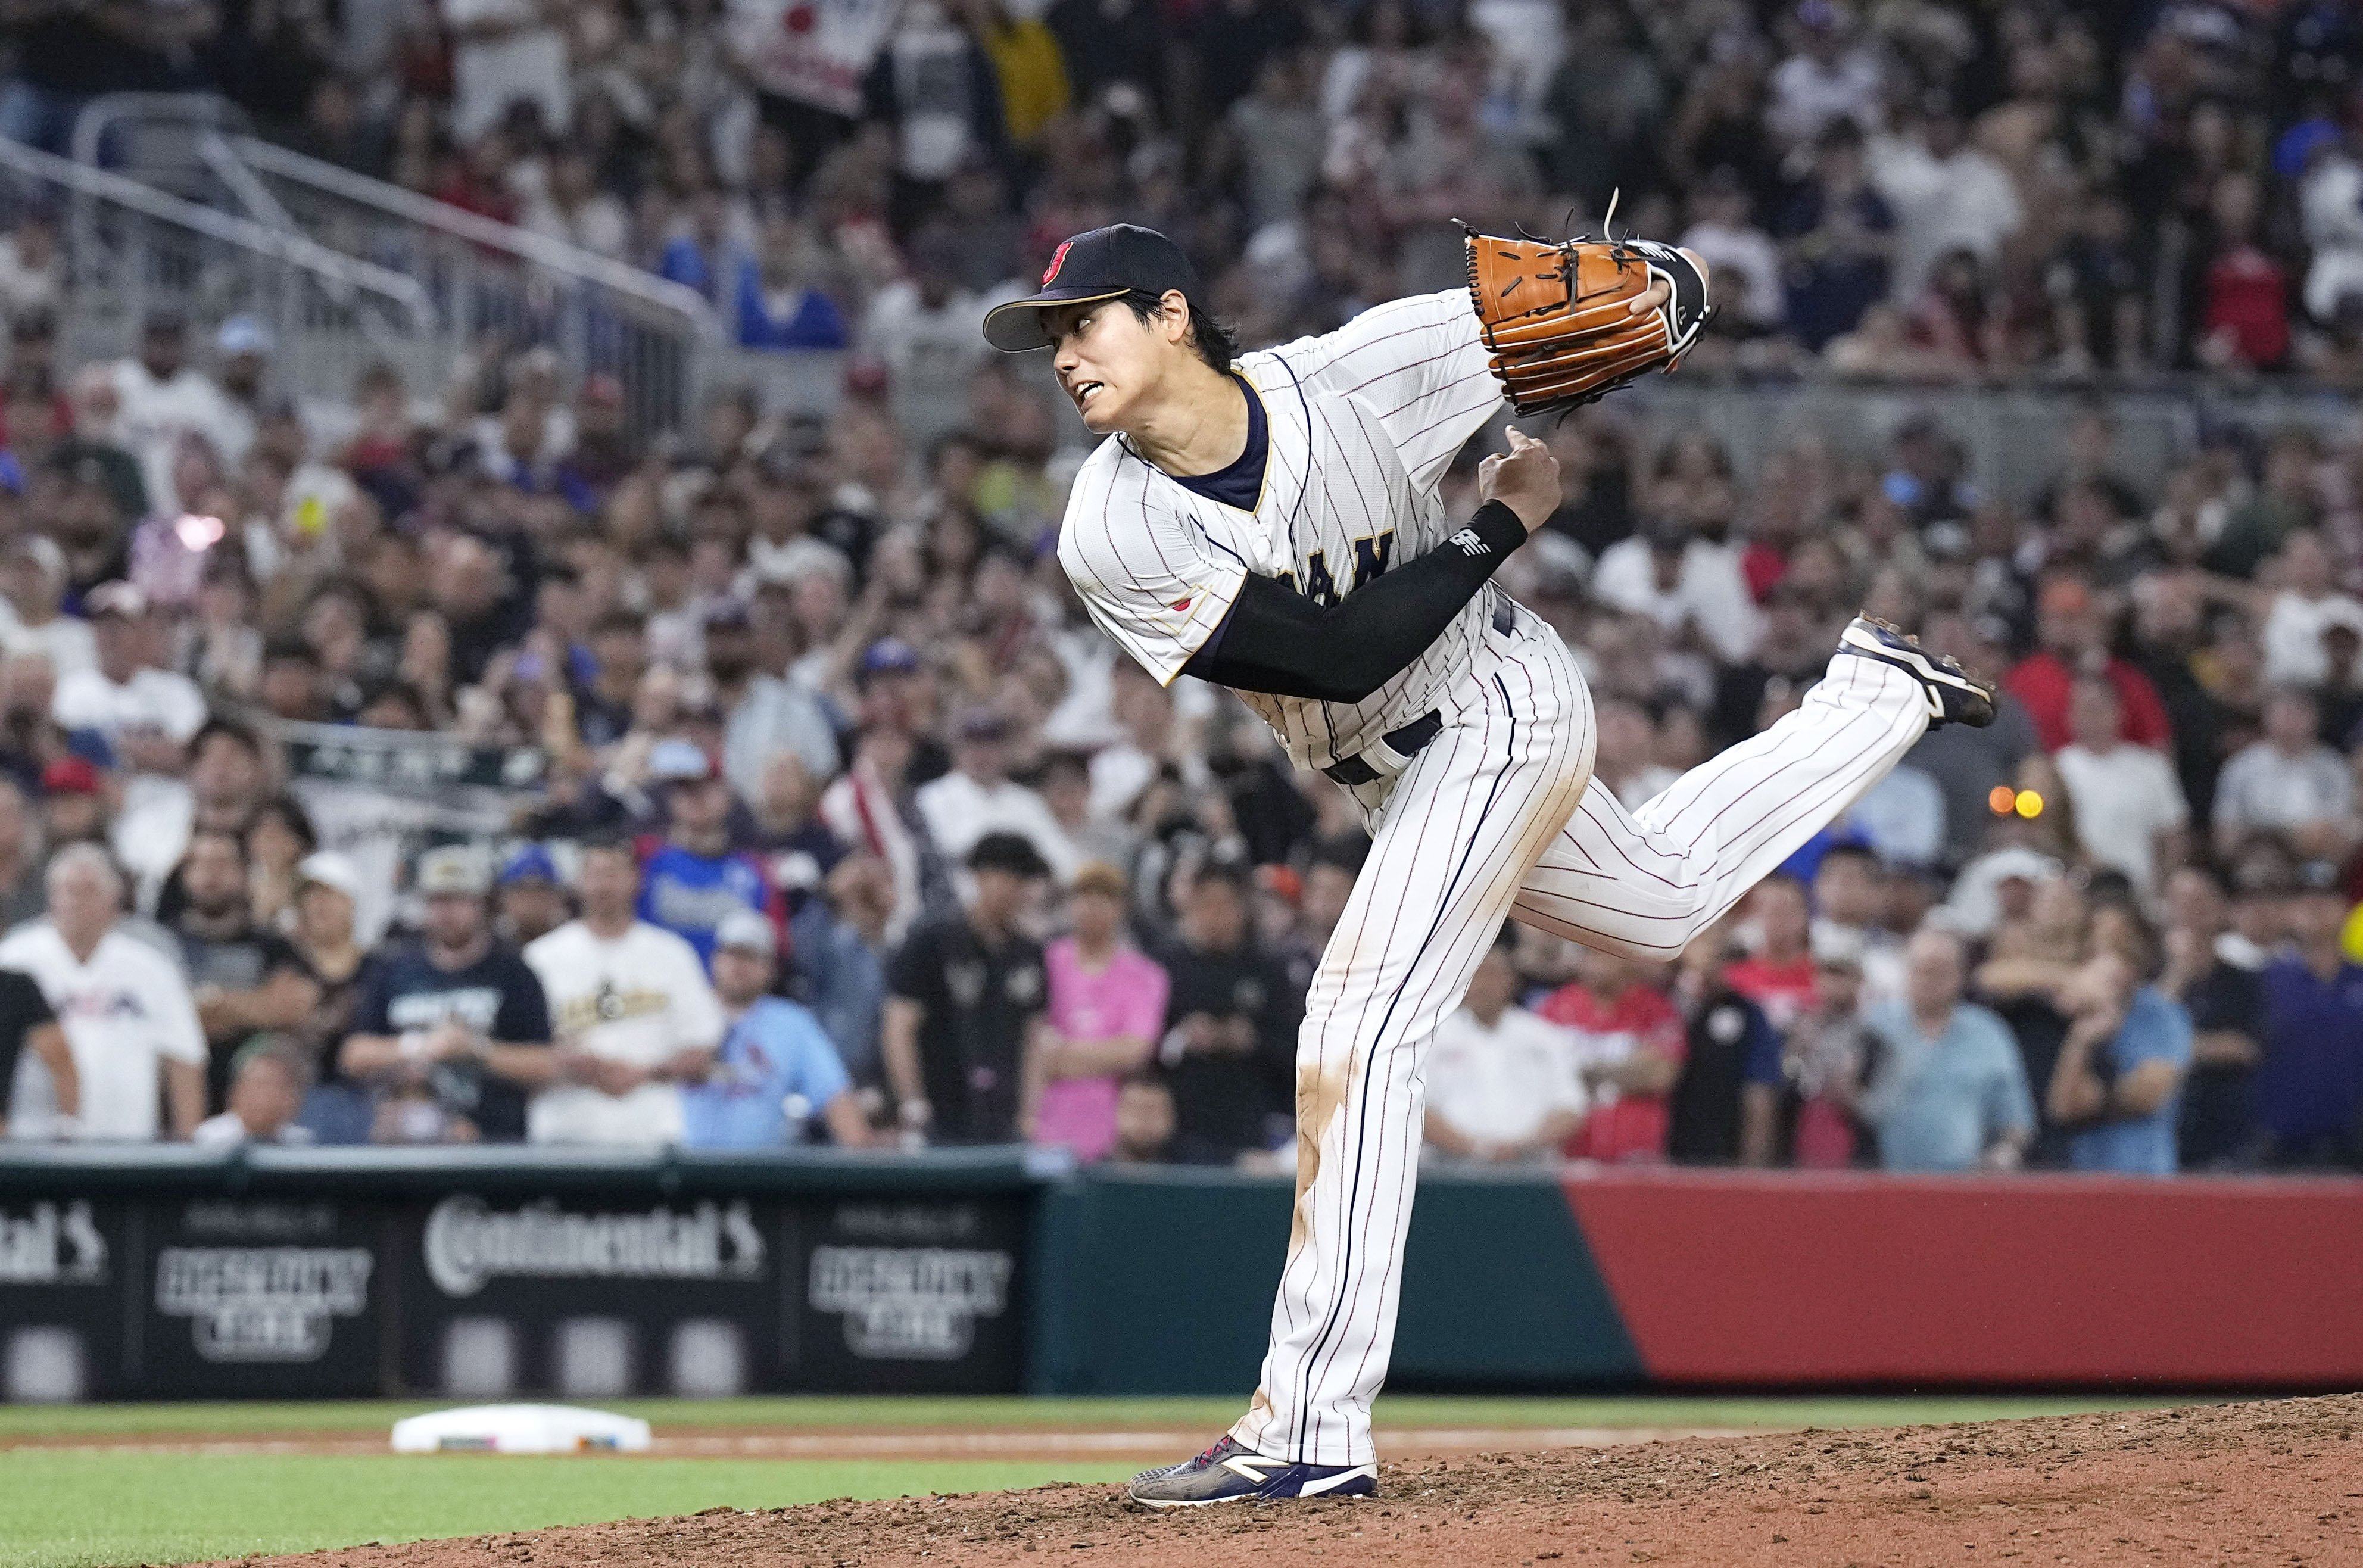 Japan’s Shohei Ohtani makes a relief appearance in the ninth inning of the World Baseball Classic final against the United States at loanDepot park in Miami, Florida, on March 21, 2023. Ohtani got the final three outs, sealing Japan’s 3-2 win. Photo: Kyodo